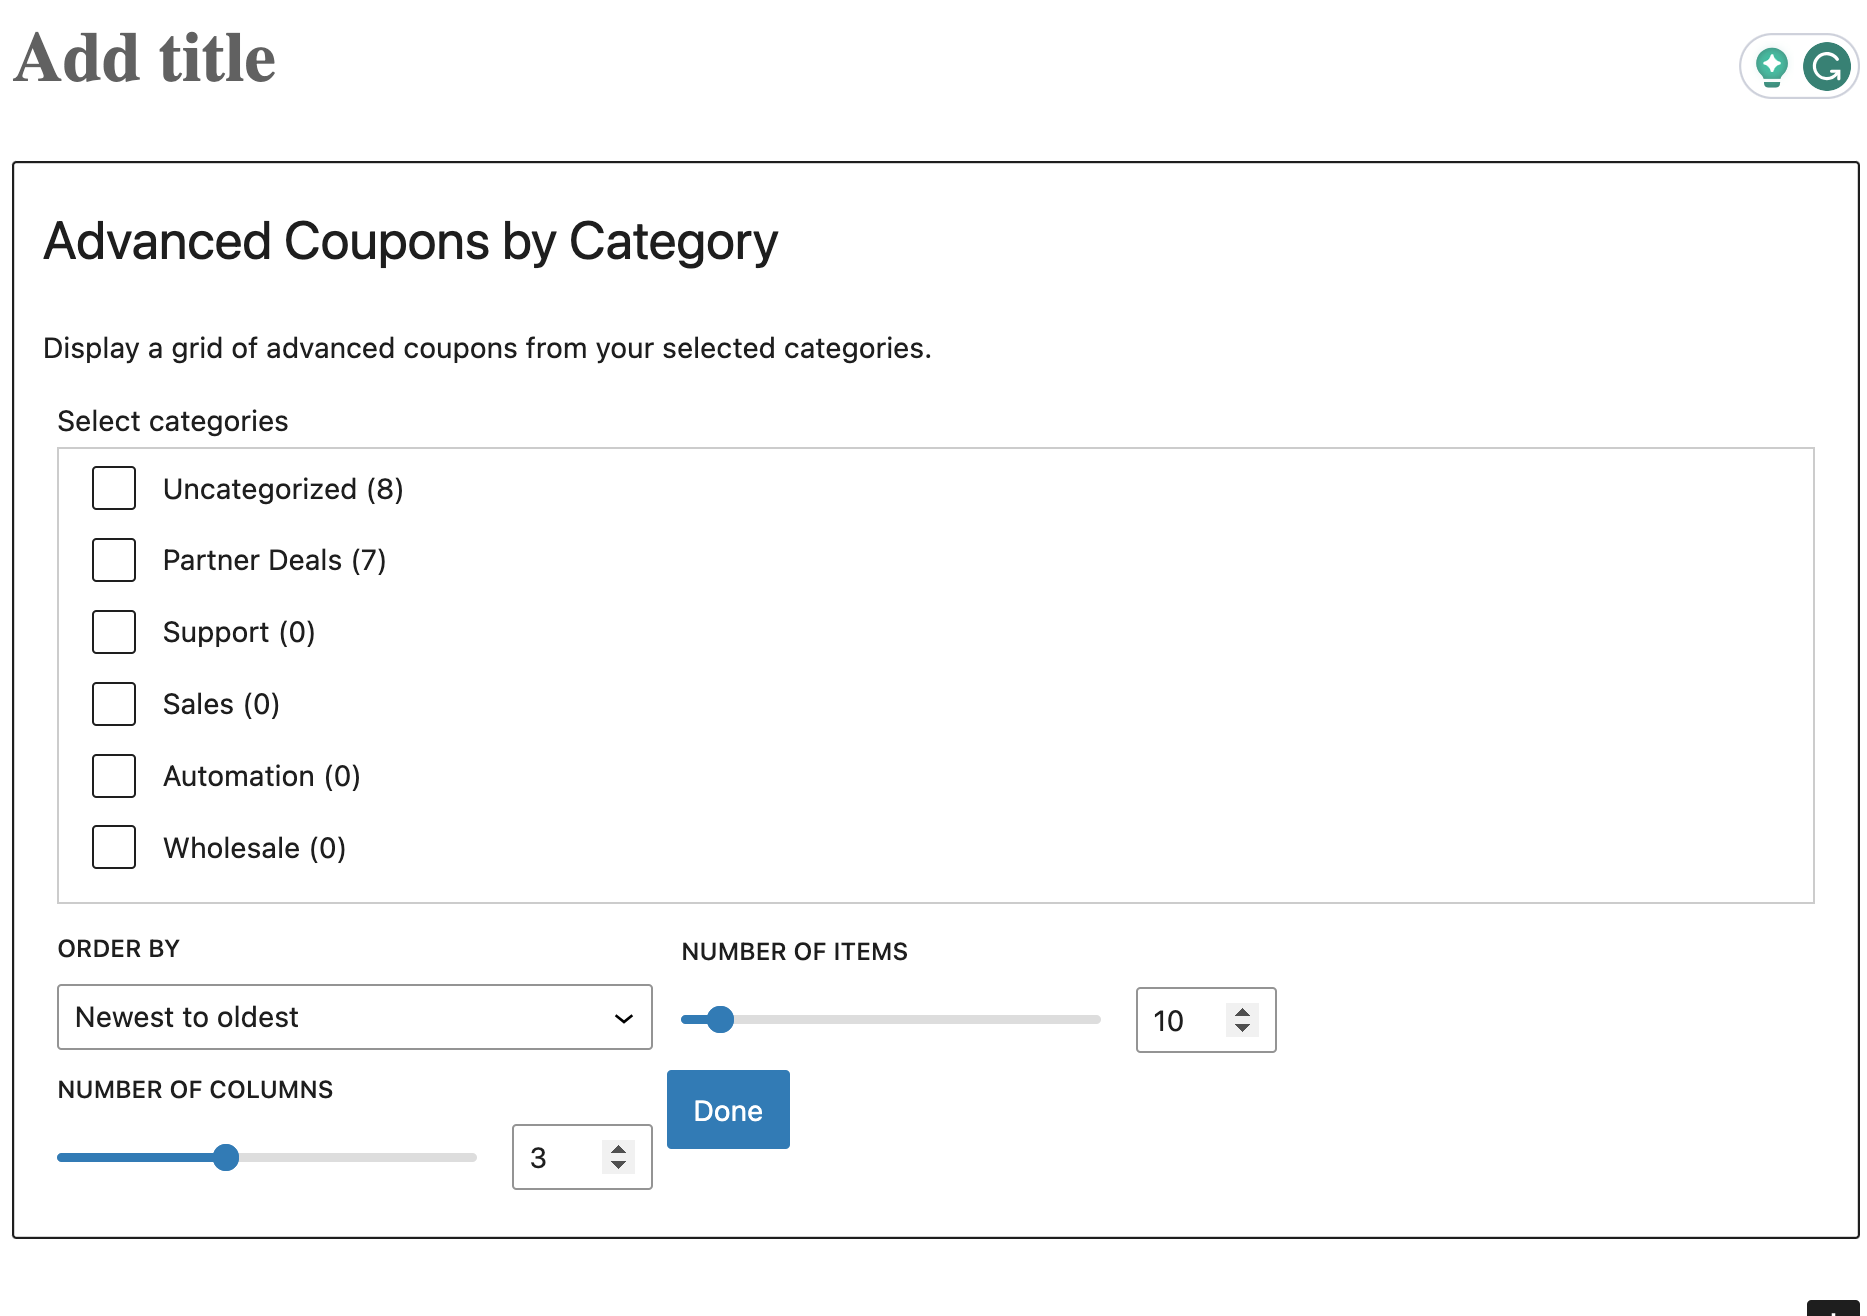 Advanced Coupons by Category